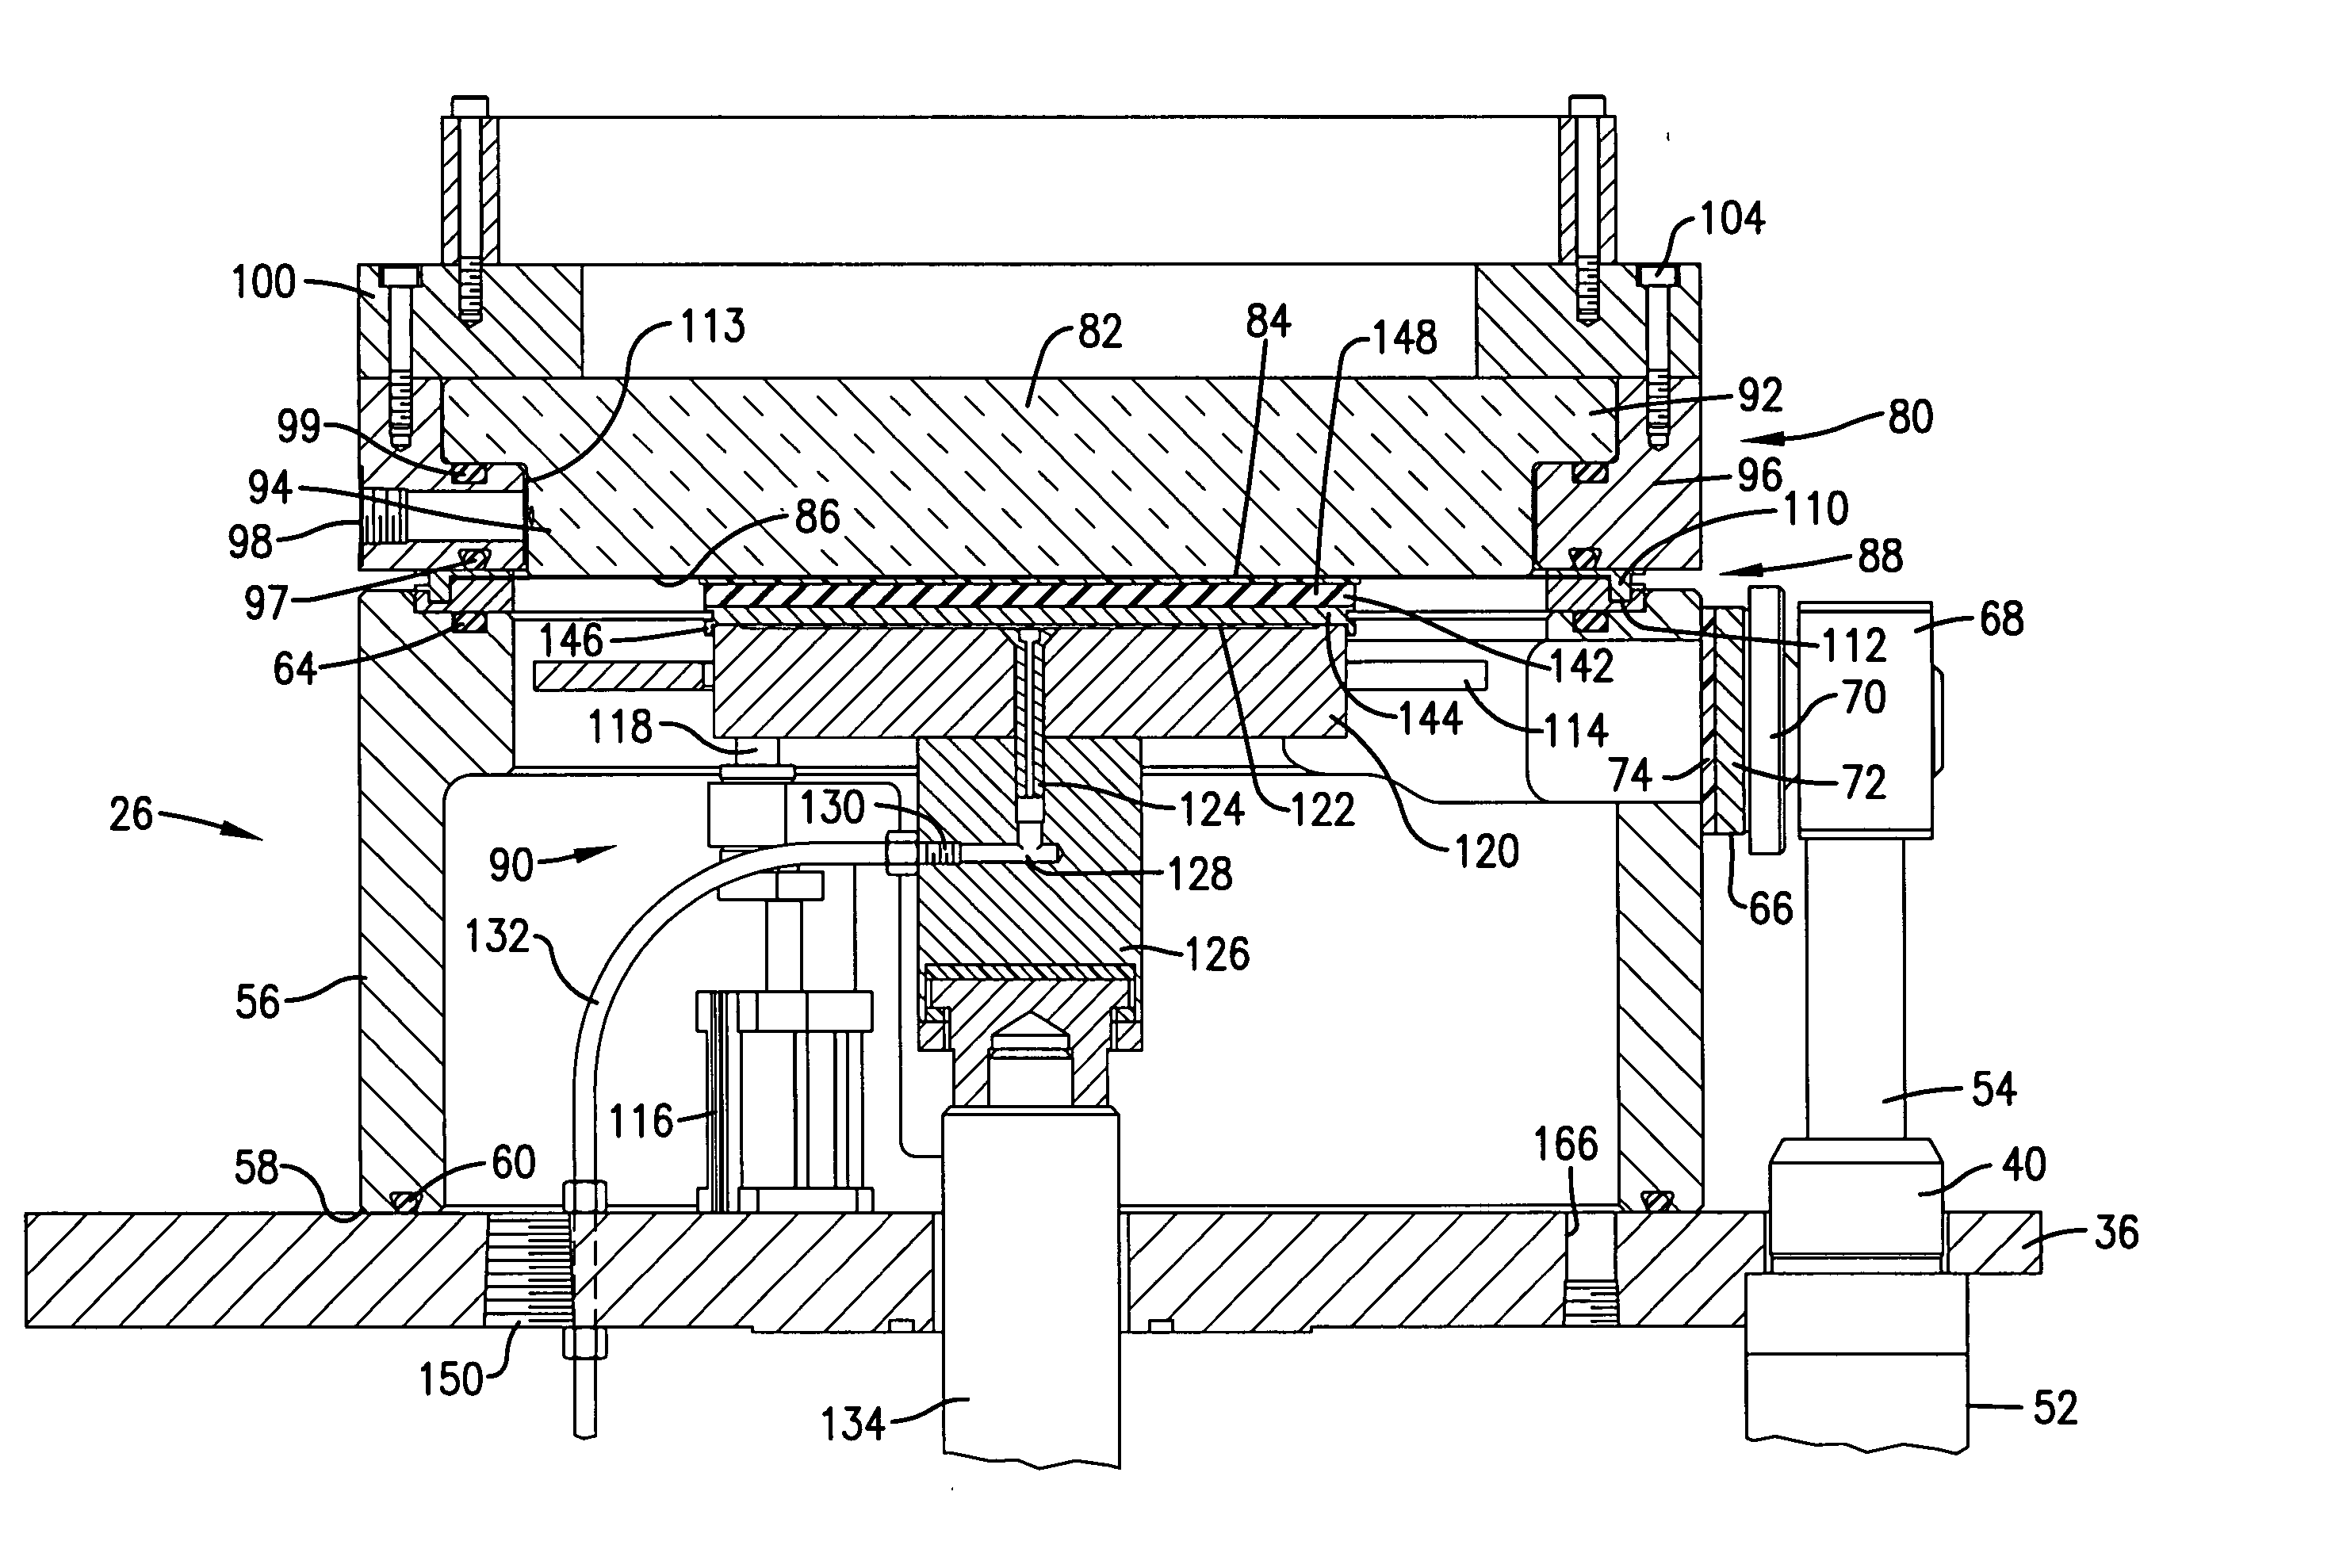 Automated process and apparatus for planarization of topographical surfaces